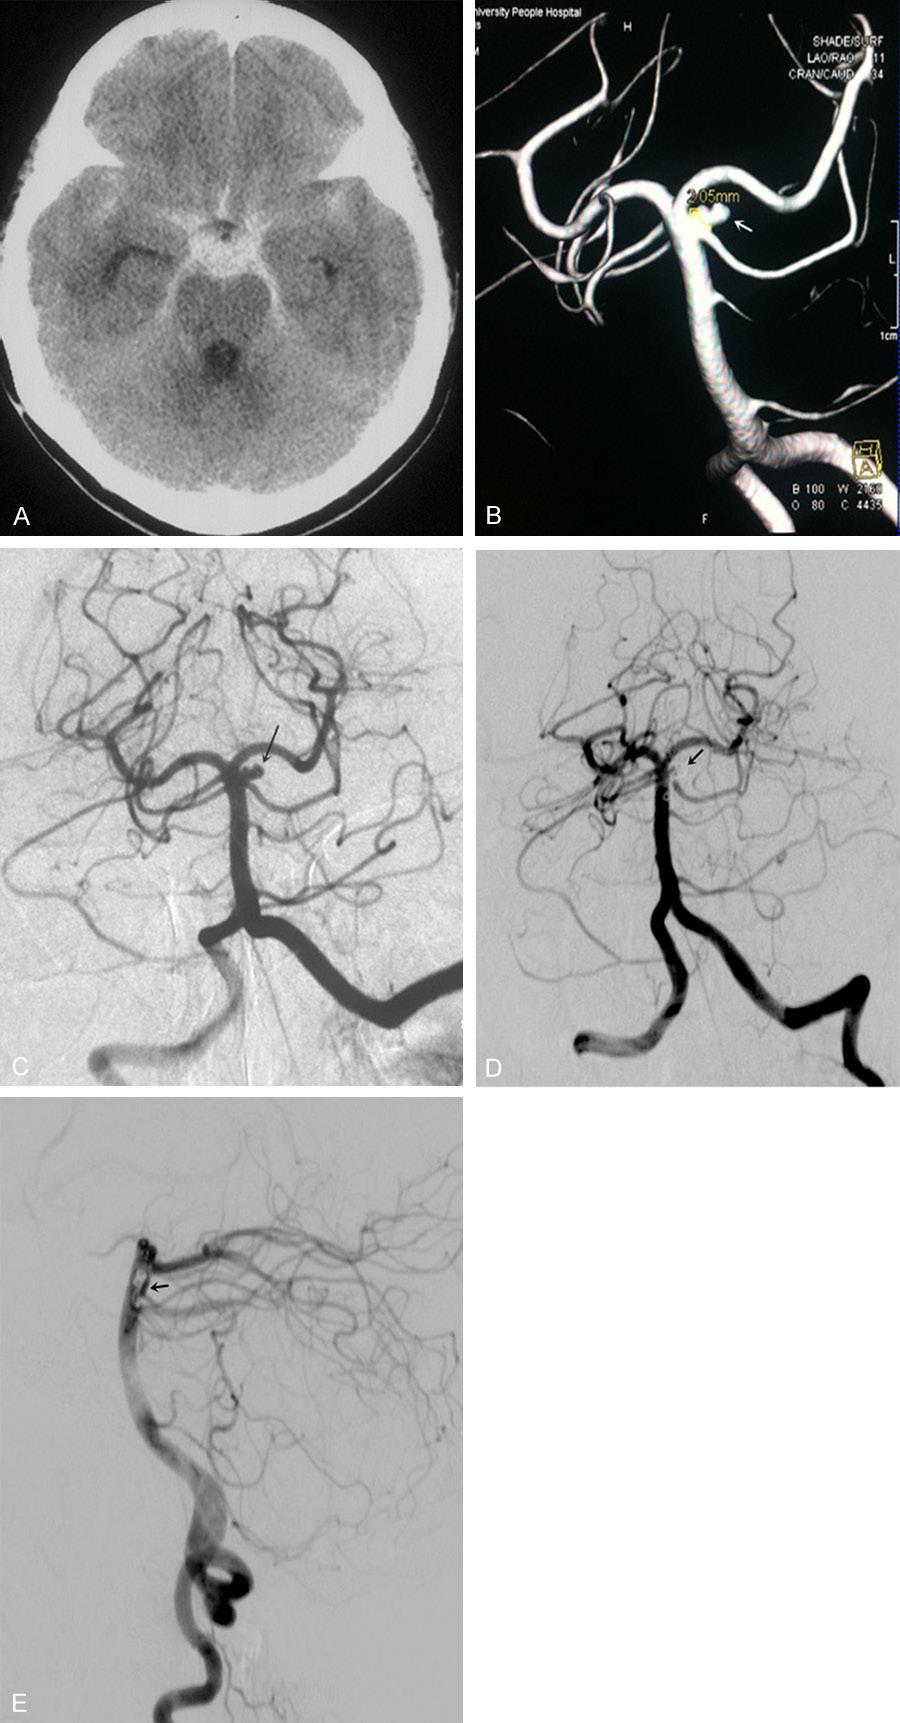 an year showed stable occlusion of the aneurysm with endovascular coil in place (Figure 1E). Case 2 A 52-year-old lady with a history of hypertension, presented with severe headache and Figure 1. A. Computer tomography scan shows subarachnoid hemorrhage (arrows) in the sylvian cisterns.